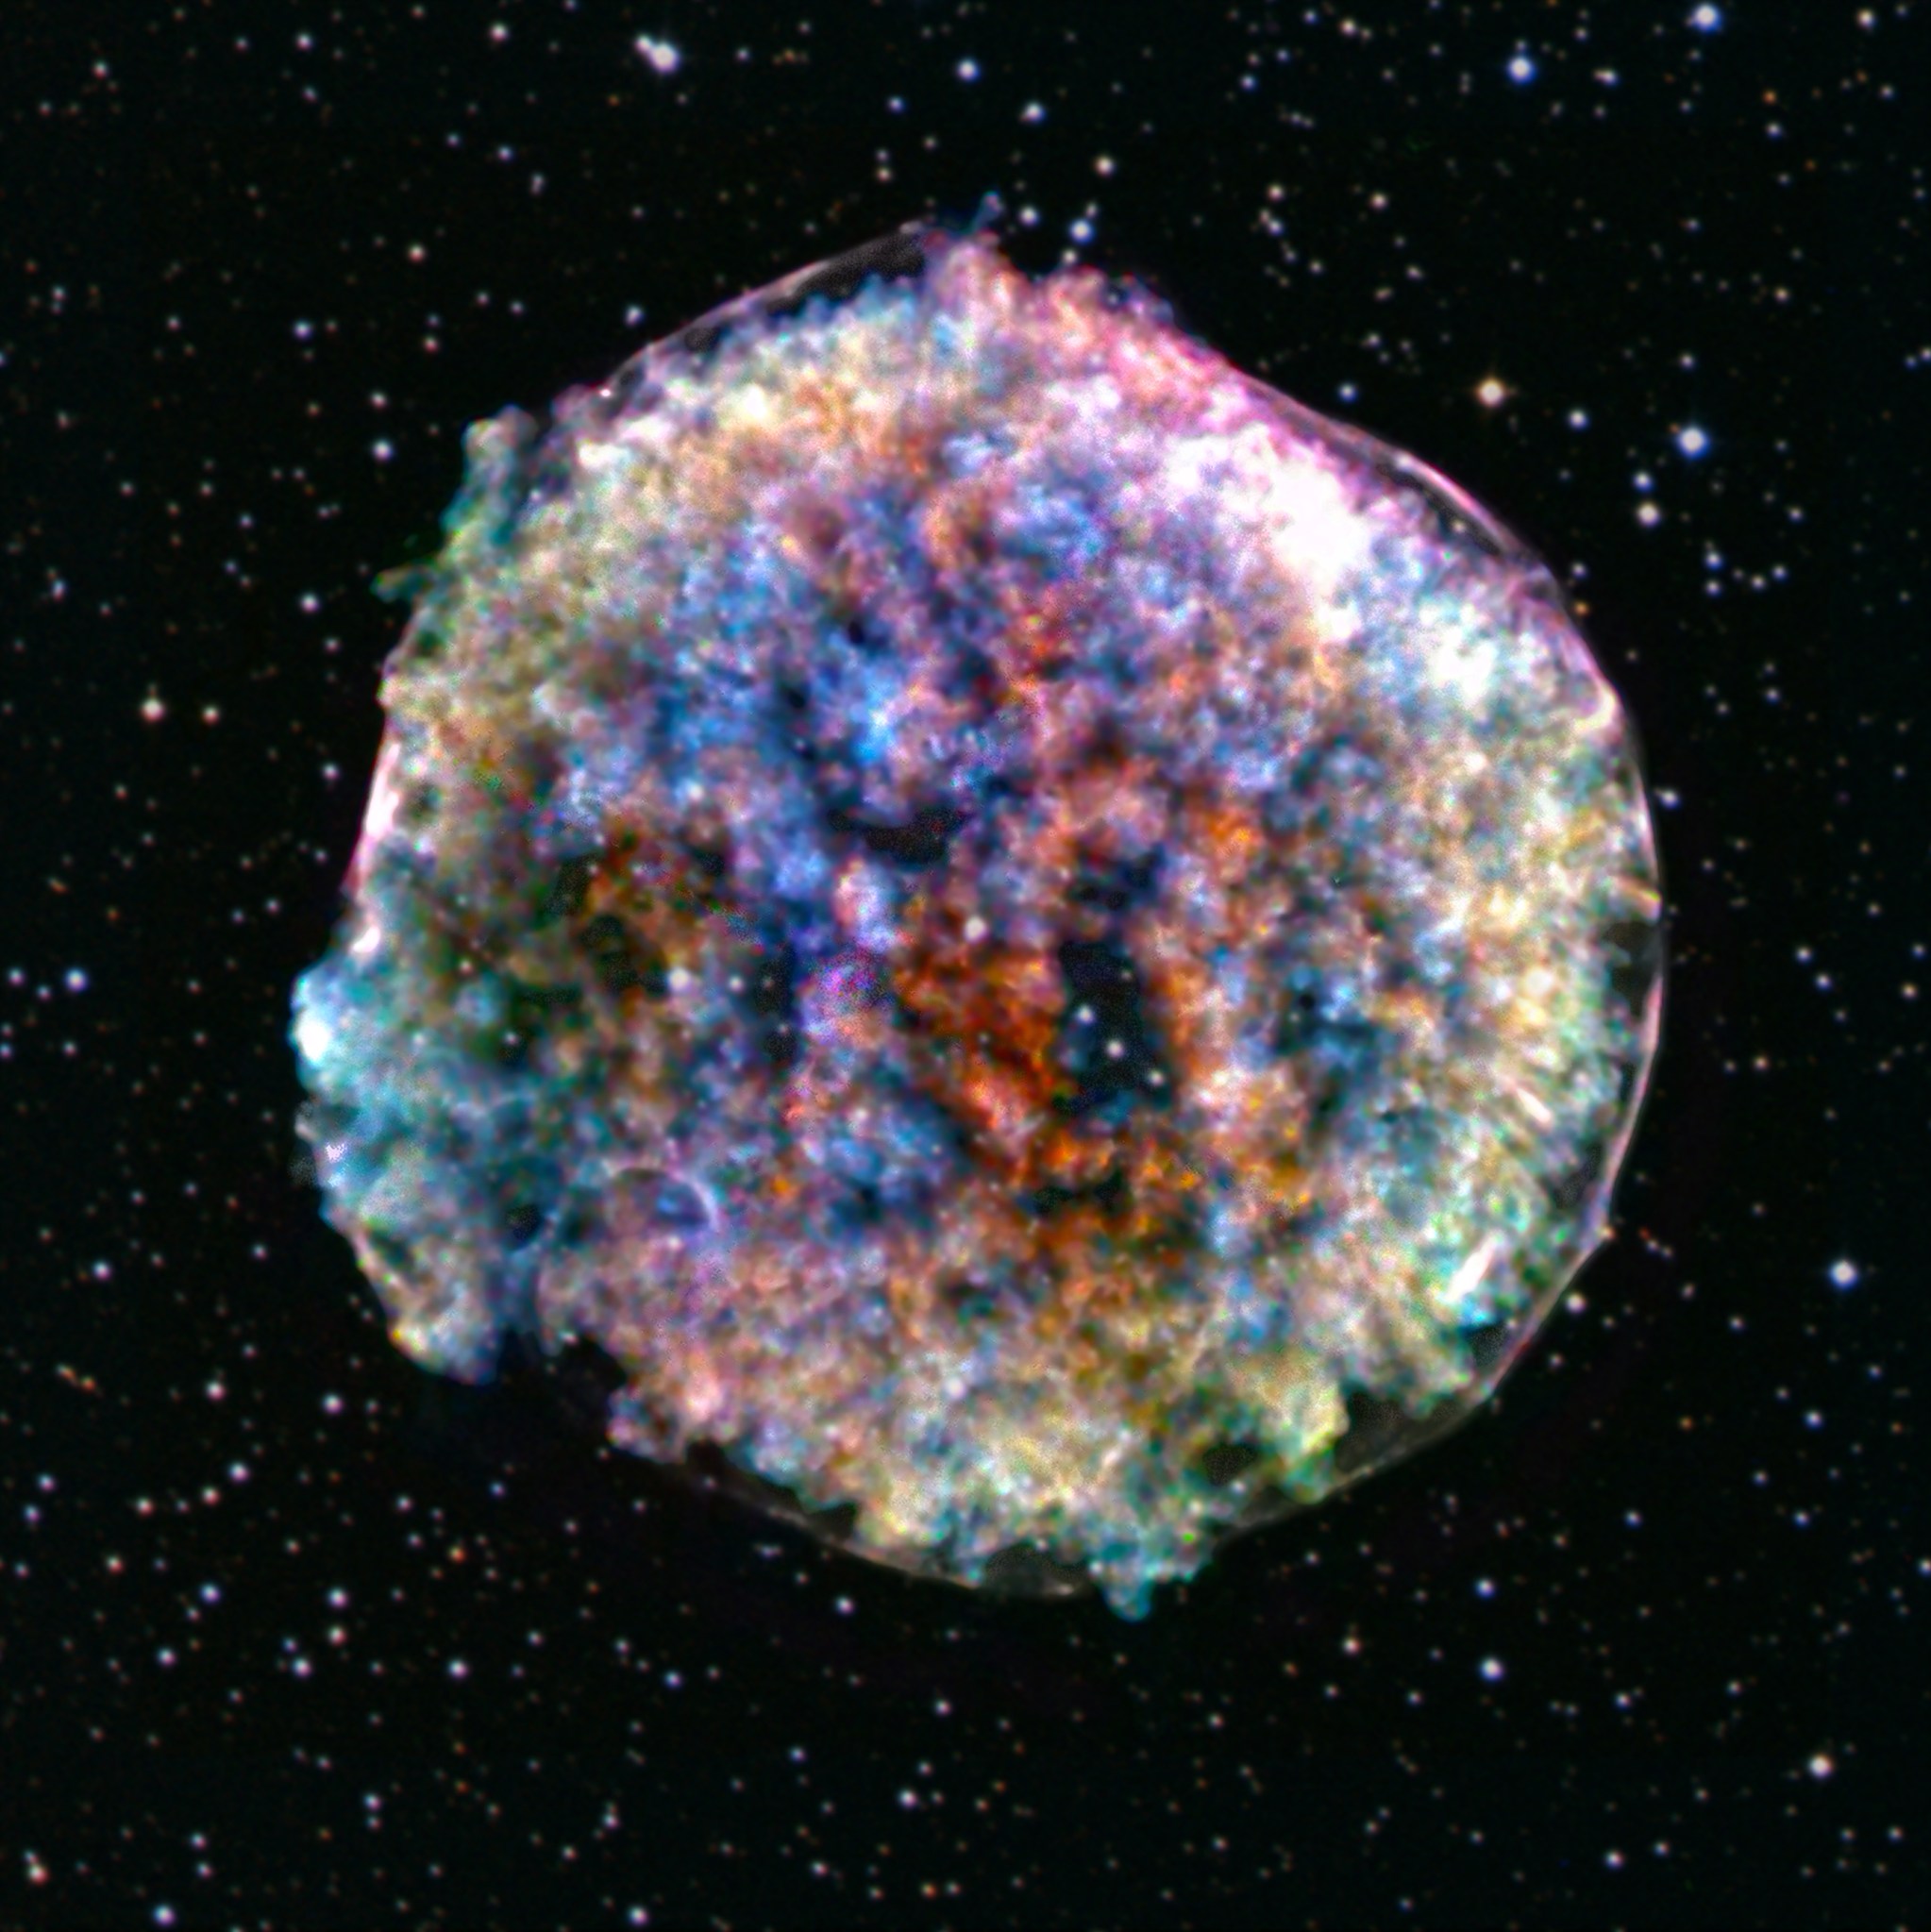 A new image of the Tycho supernova remnant from Chanda shows a pattern of bright clumps and fainter holes in the X-ray data.